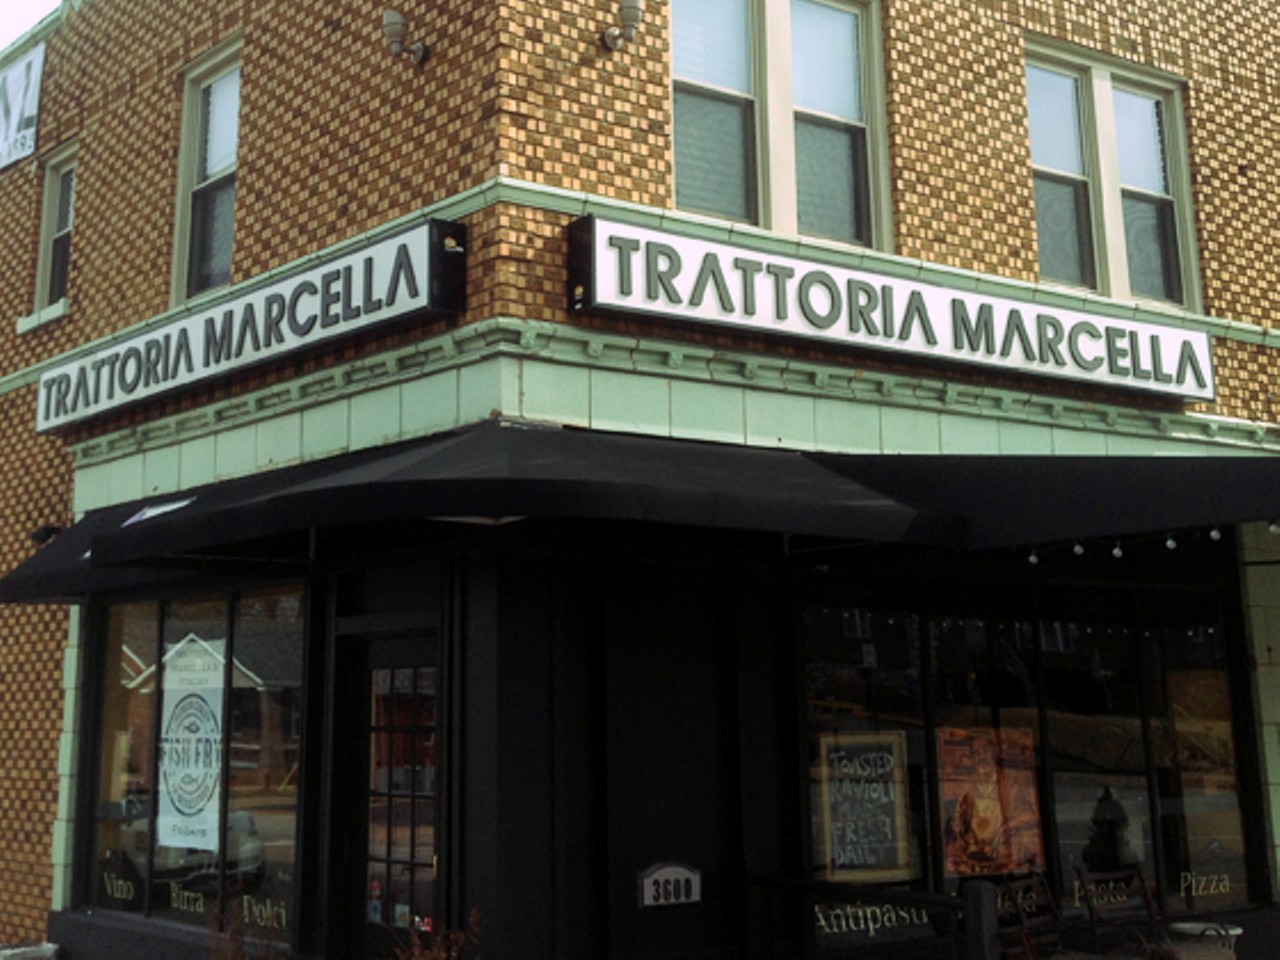 Trattoria Marcella
3600 Watson Road, trattoriamarcella.com
Trattoria Marcella's traditional Italian cuisine is best enjoyed à deux, and it's rumored to serve the best tiramisu in the region. What could be more romantic than that?
Read more